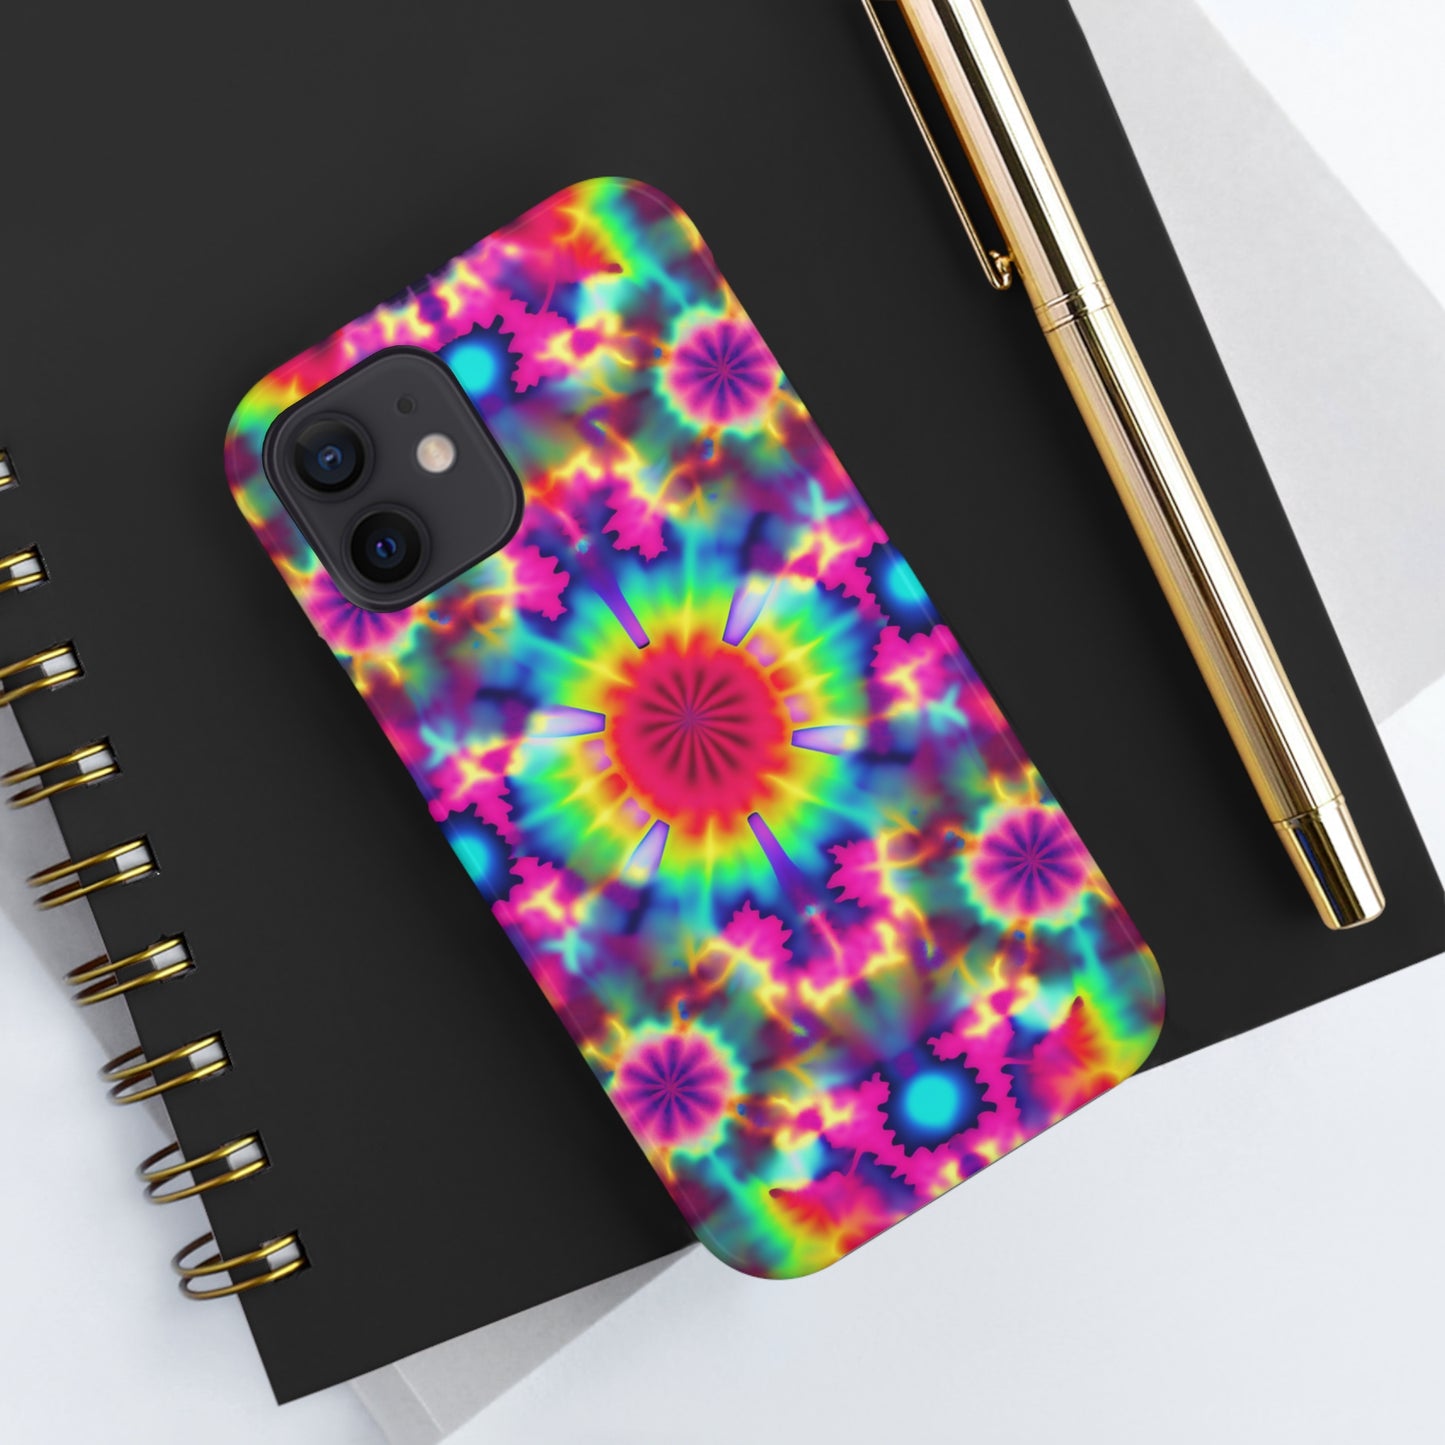 Trippy Psychedelic Fractal Tie-dye Aesthetic  | Tough iPhone Case